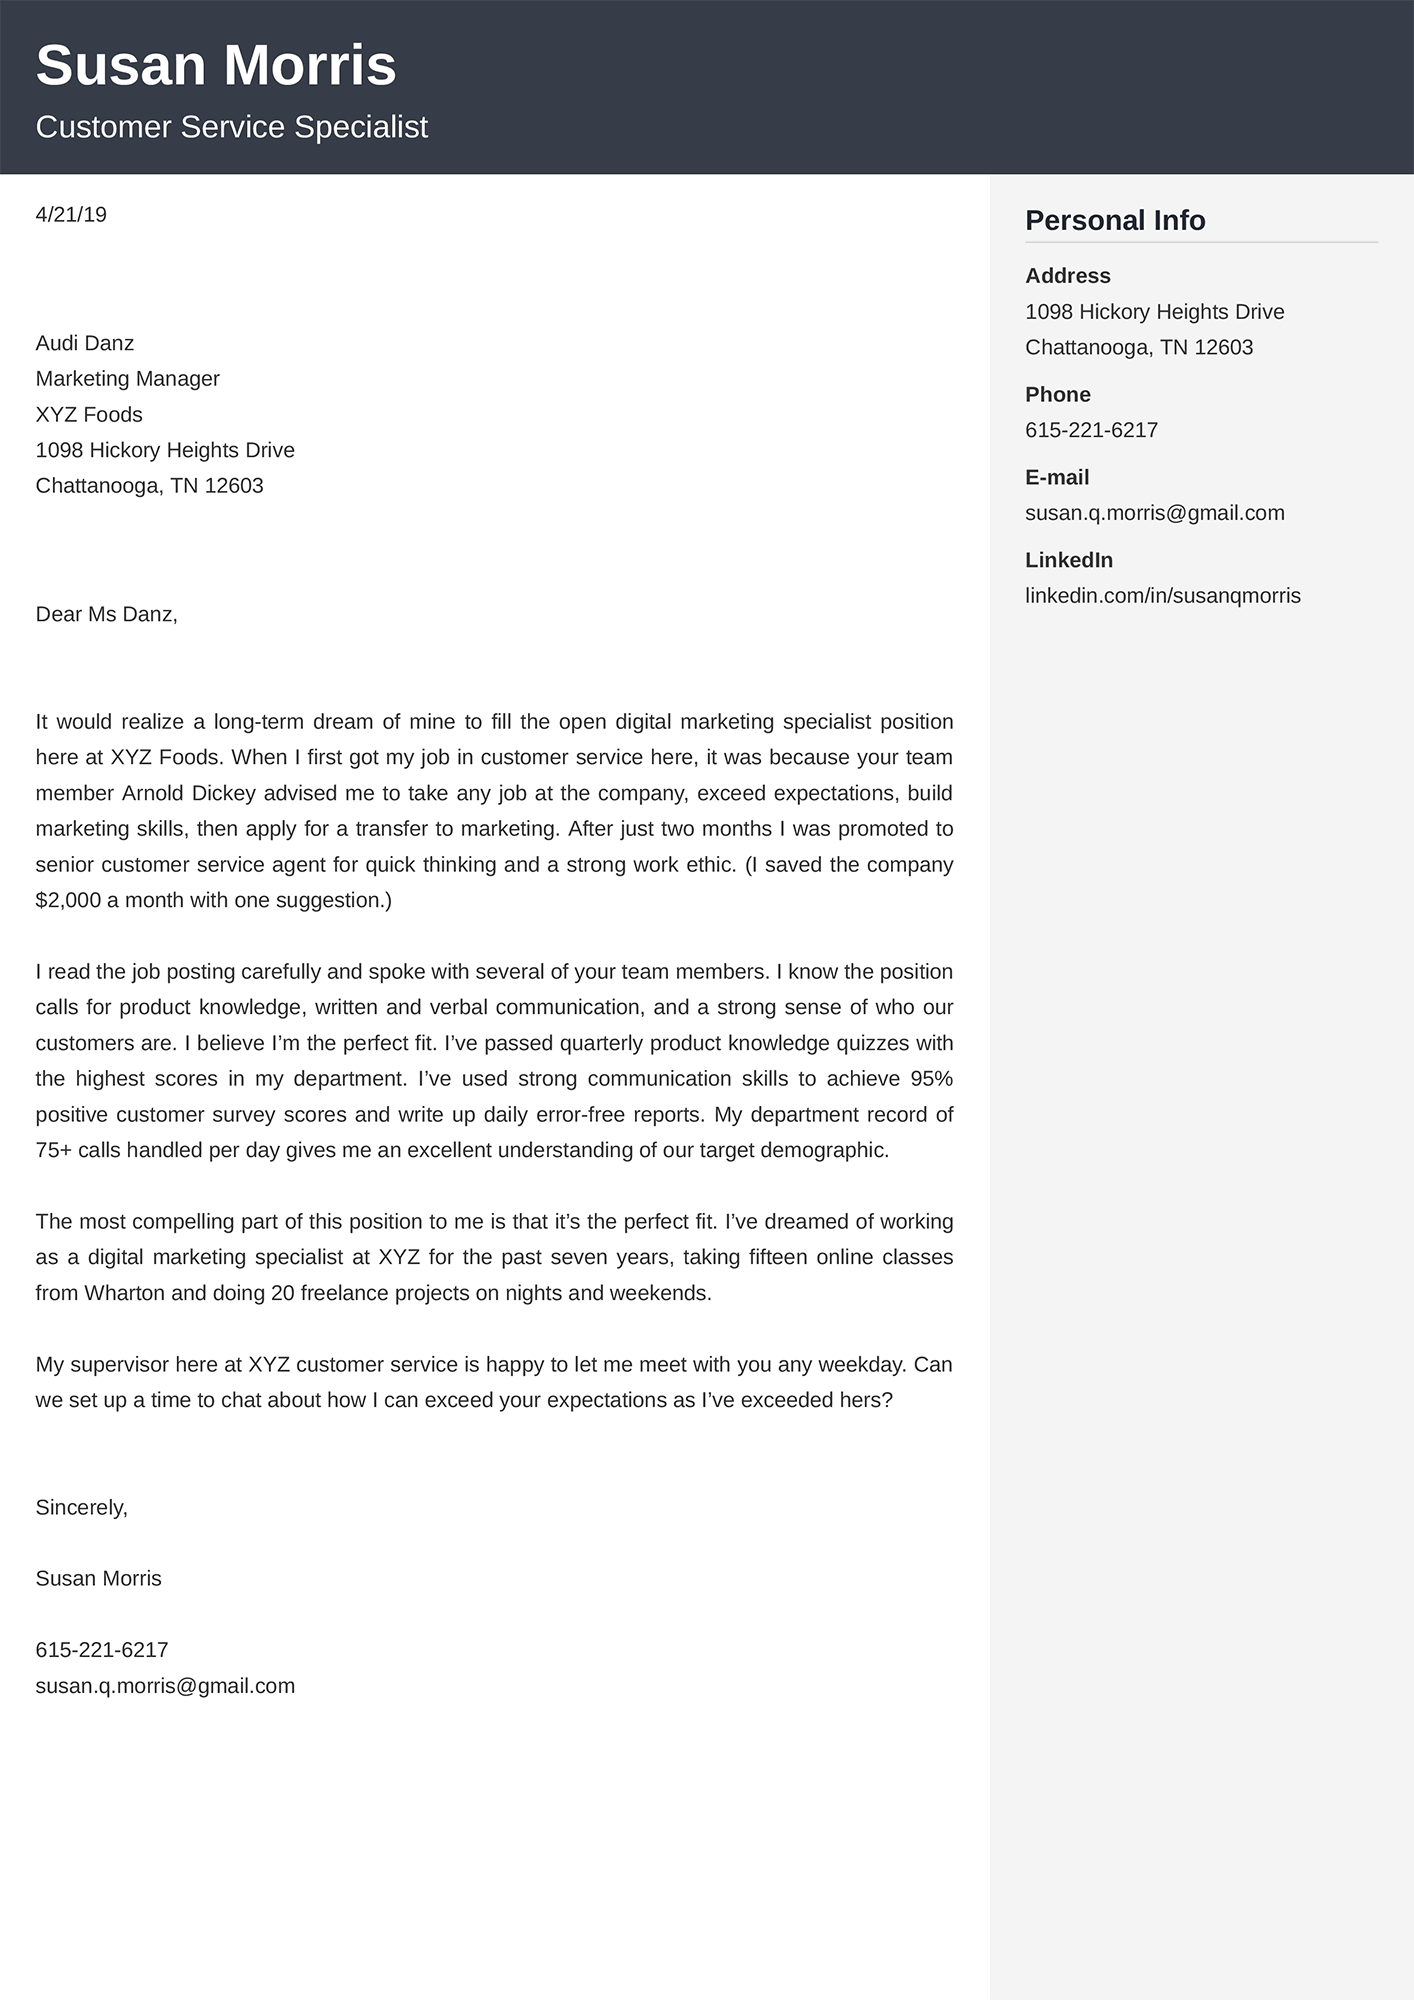 Service Industry Cover Letter from cdn-images.zety.com